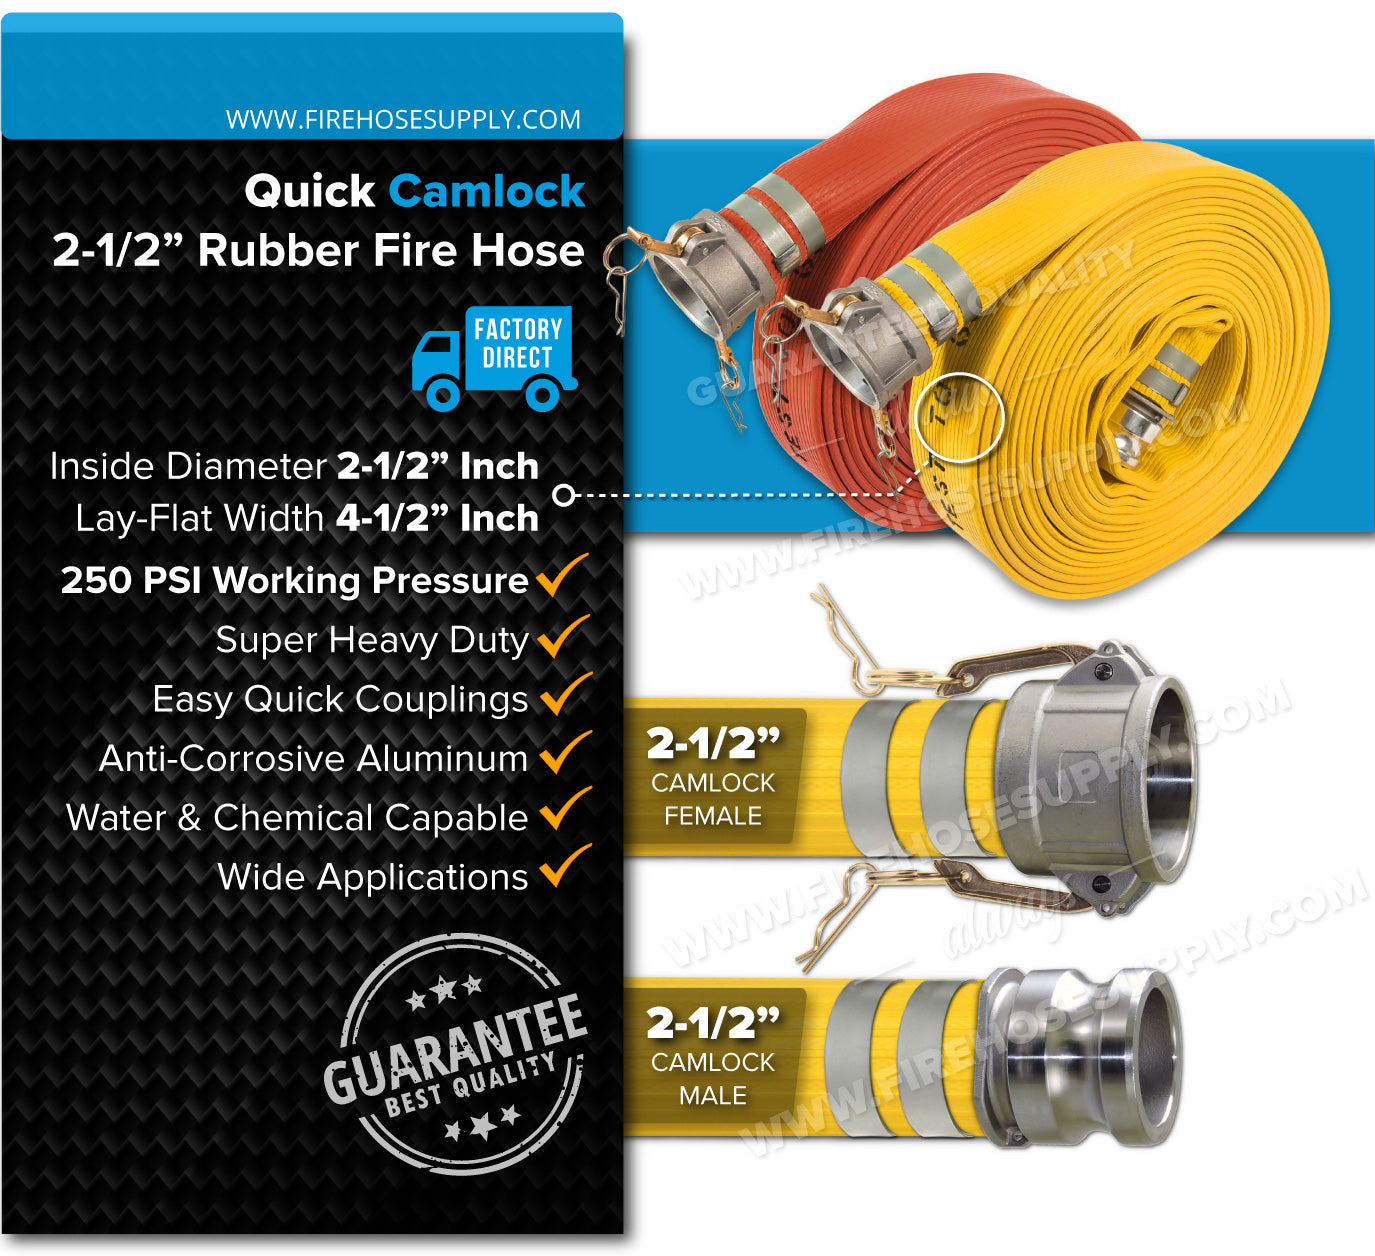 2-1-2 Inch Rubber Camlock Fire Hose Overview